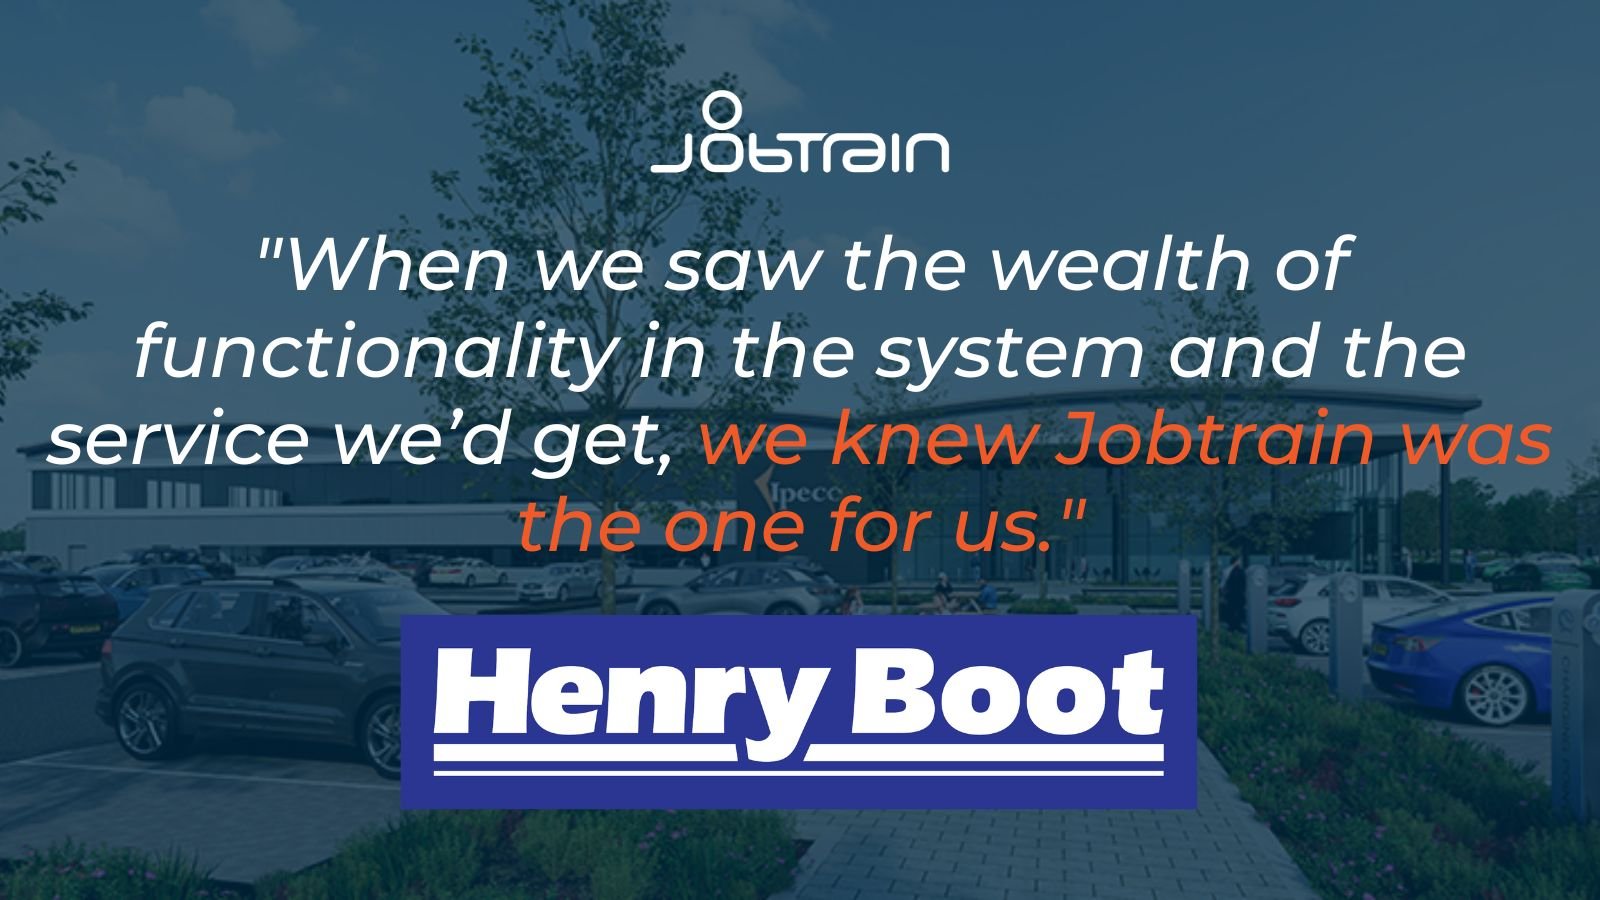 Henry Boot testimonial - "When we saw the wealth of functionality in the system and the service we'd get, we knew Jobtrain was the one for us."